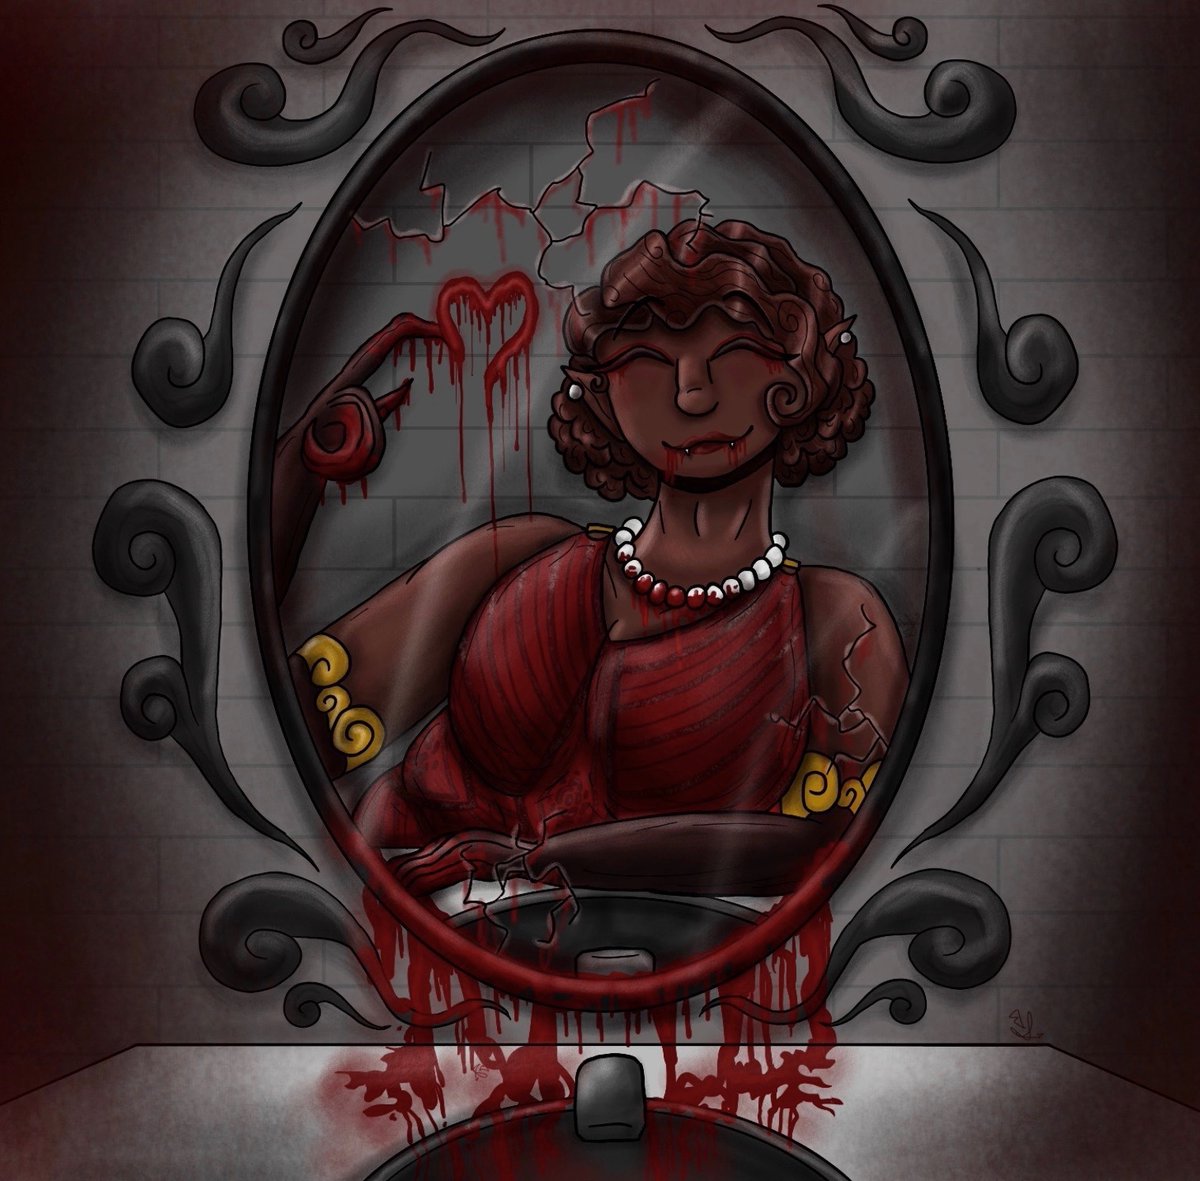 🪞🩸Bloody Mary (Davis) 🩸🪞

One chance maam please❤️

// suckening episode 11 spoilers 

#jrwi #justrollwithit #jrwifanart #justrollwithitfanart #jrwithesuckening #thesuckening #marydavis #jrwi #jrwimary #jrwimarydavis #bloodymary #thesuckeningfanart #woman #vampire #slimecicle